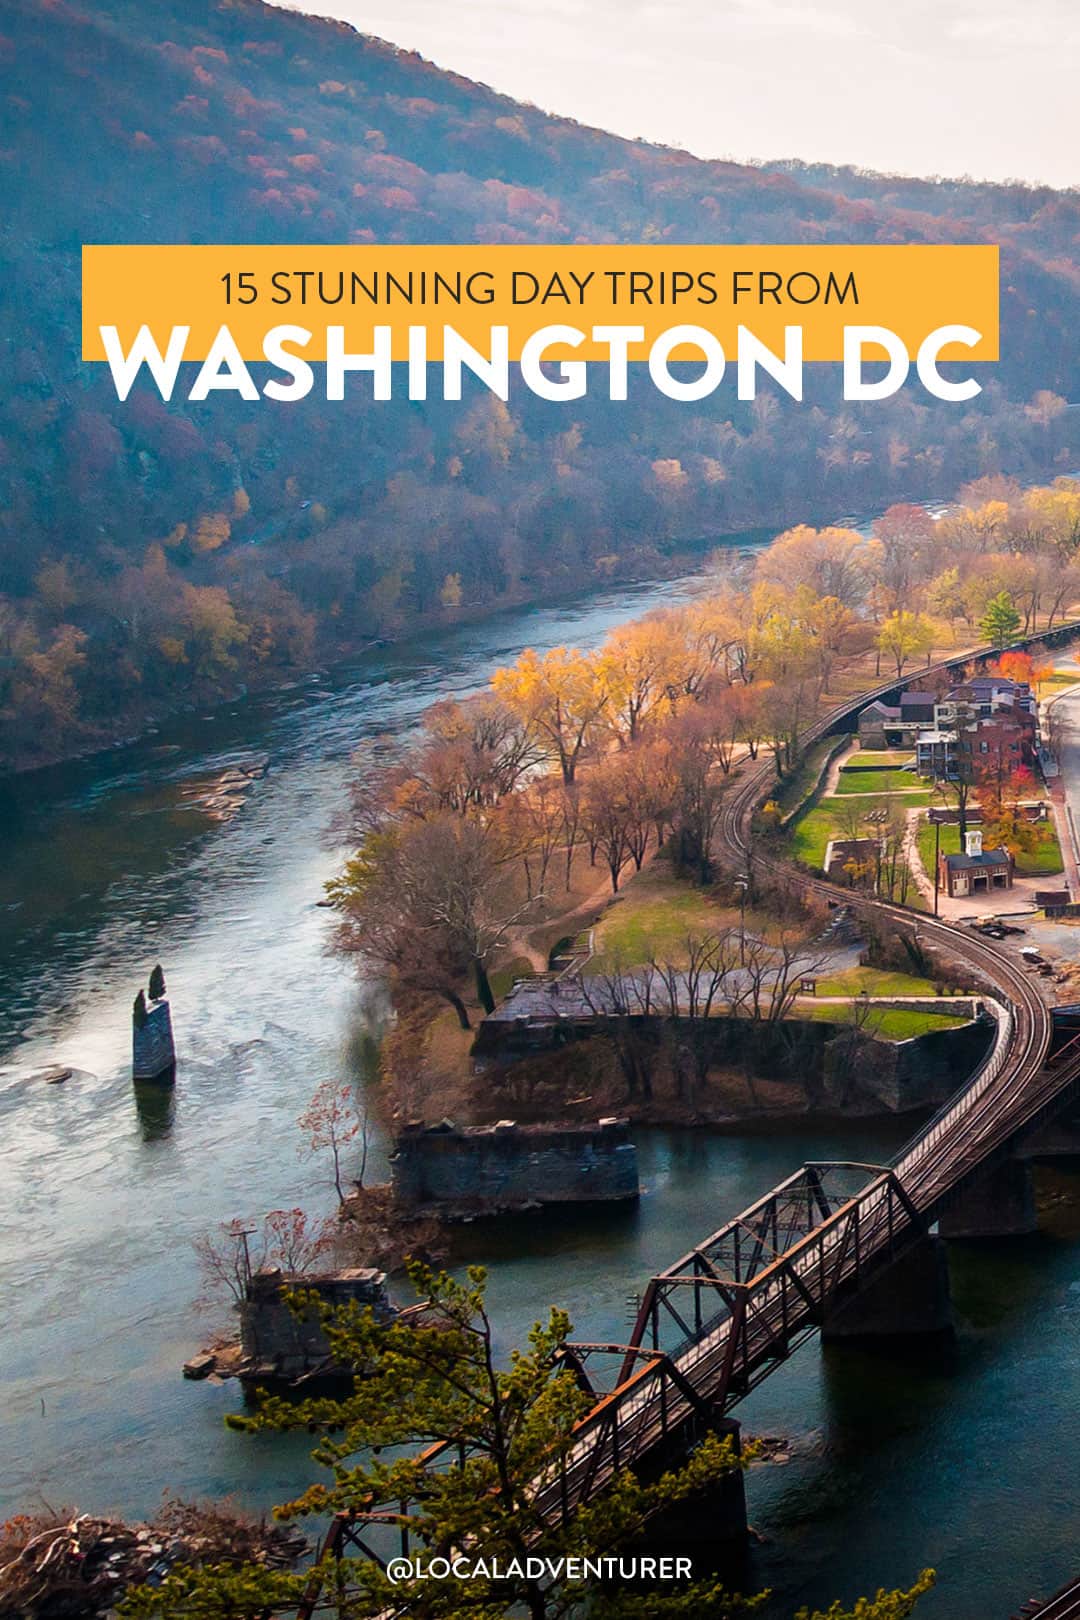 15 Stunning Day Trips from Washington DC